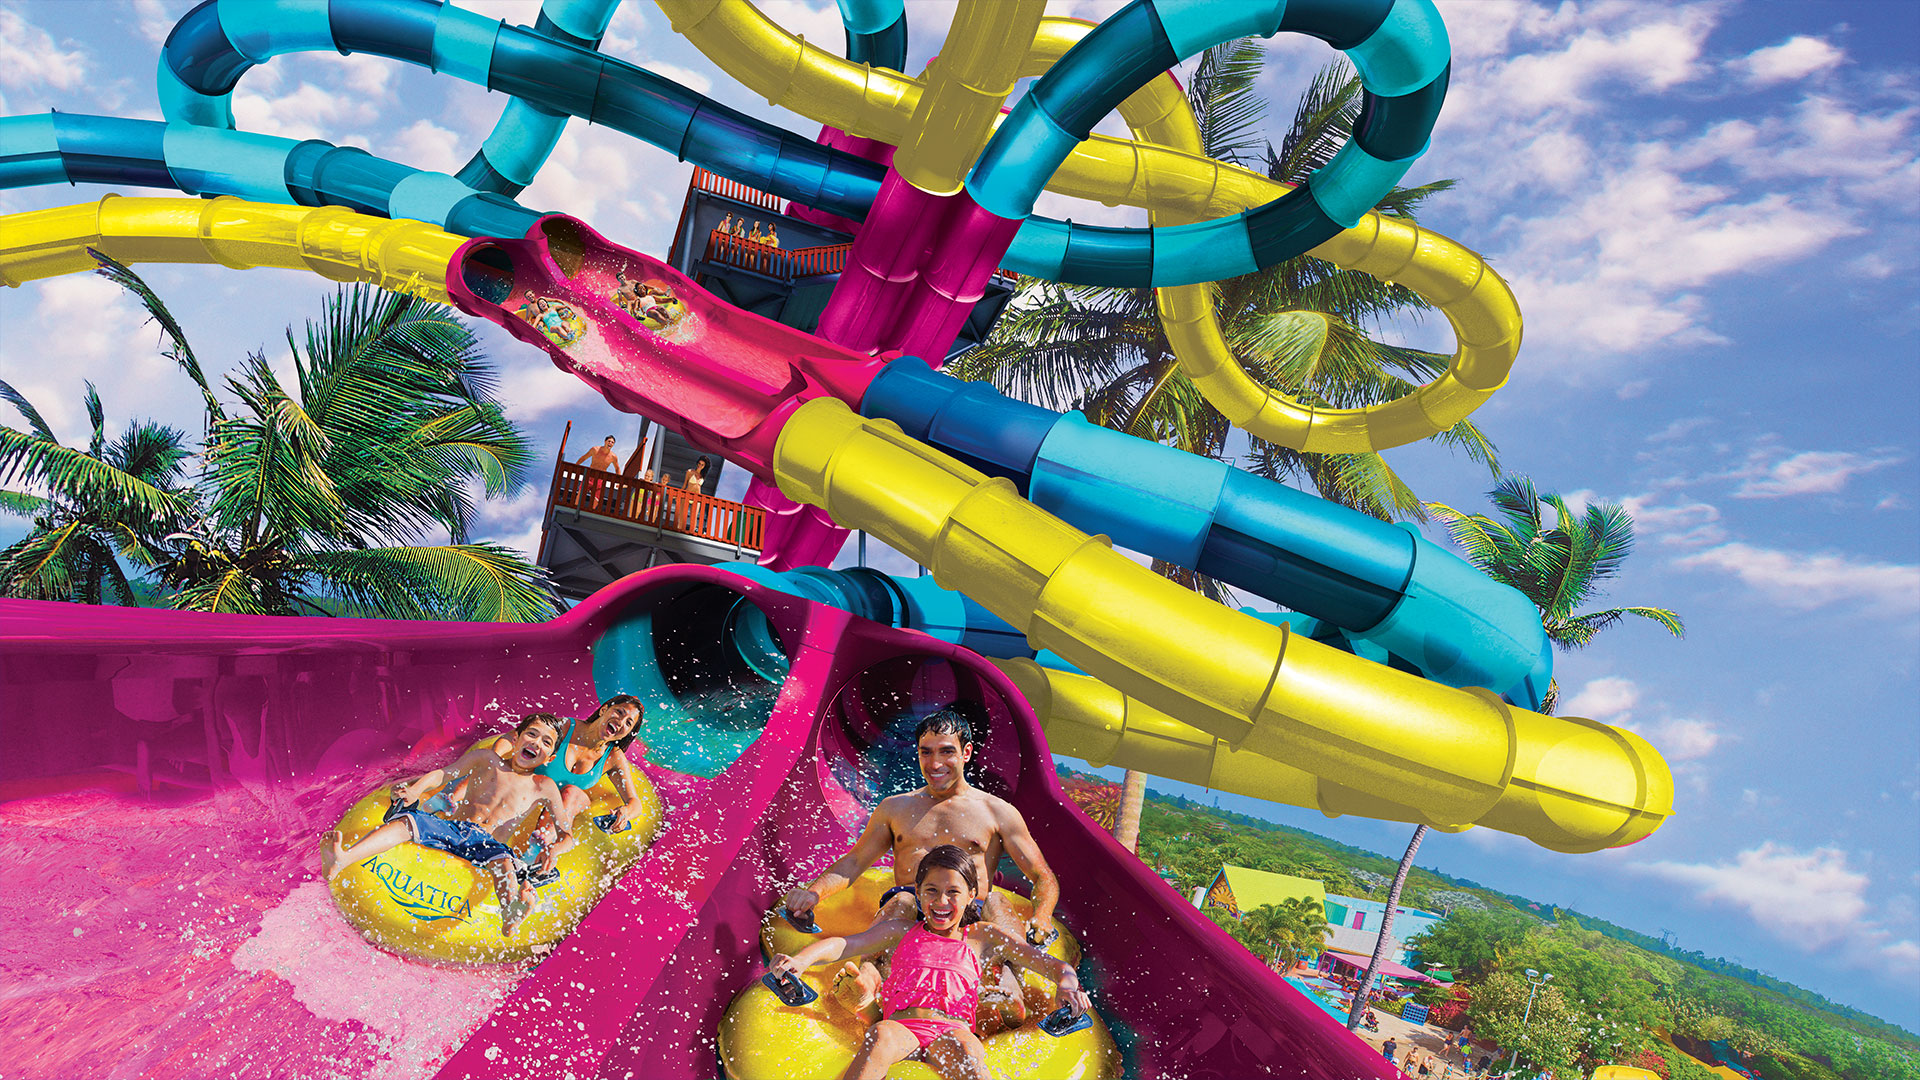 New Dueling Water Slide Ride Will Debut At Aquatica In 22